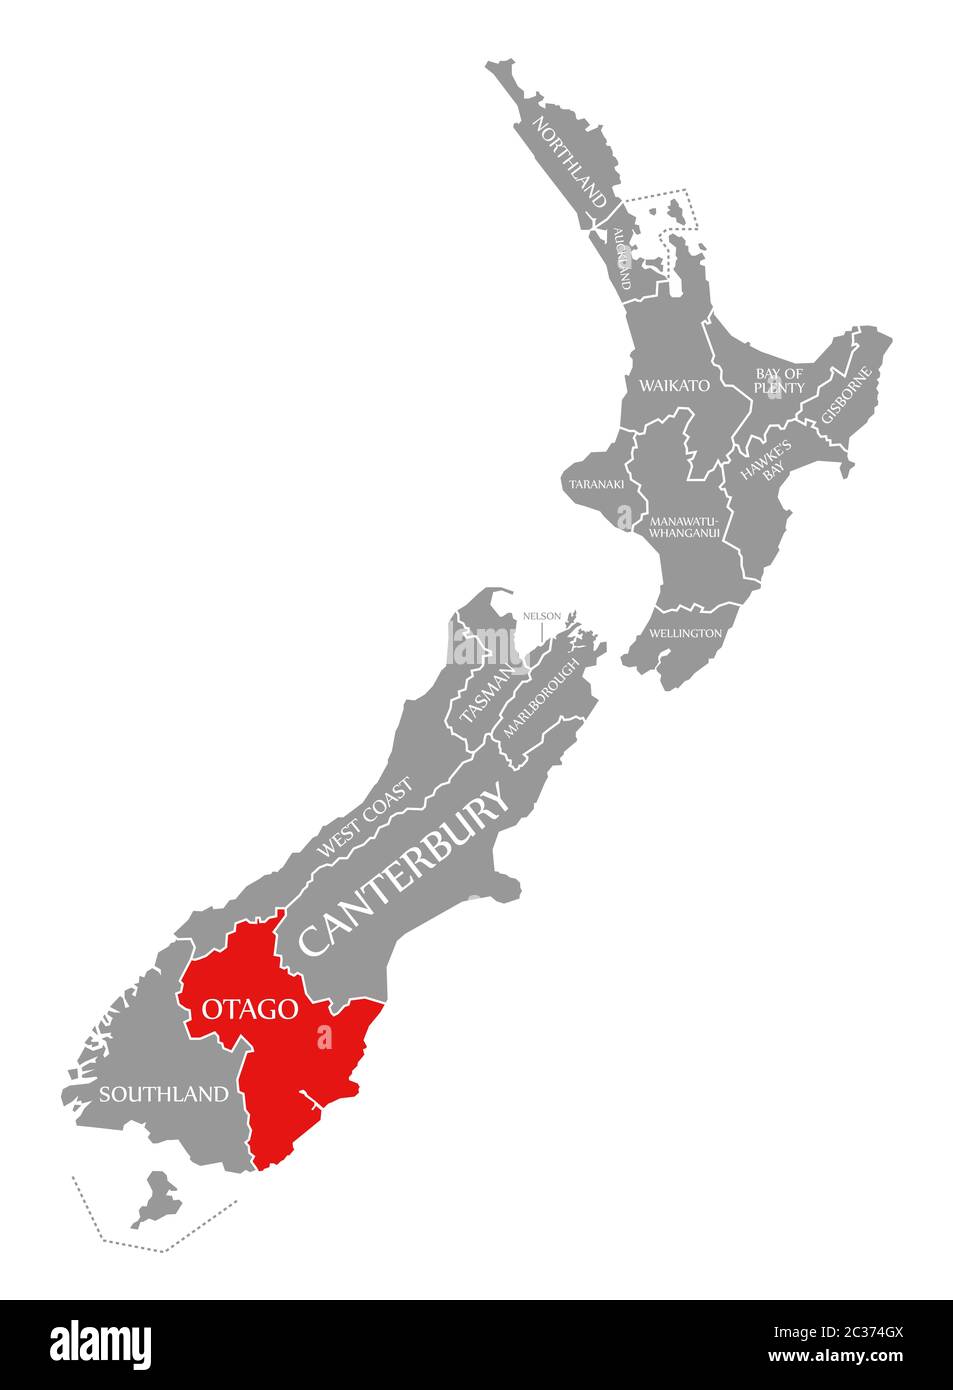 Otago red highlighted in map of New Zealand Stock Photo